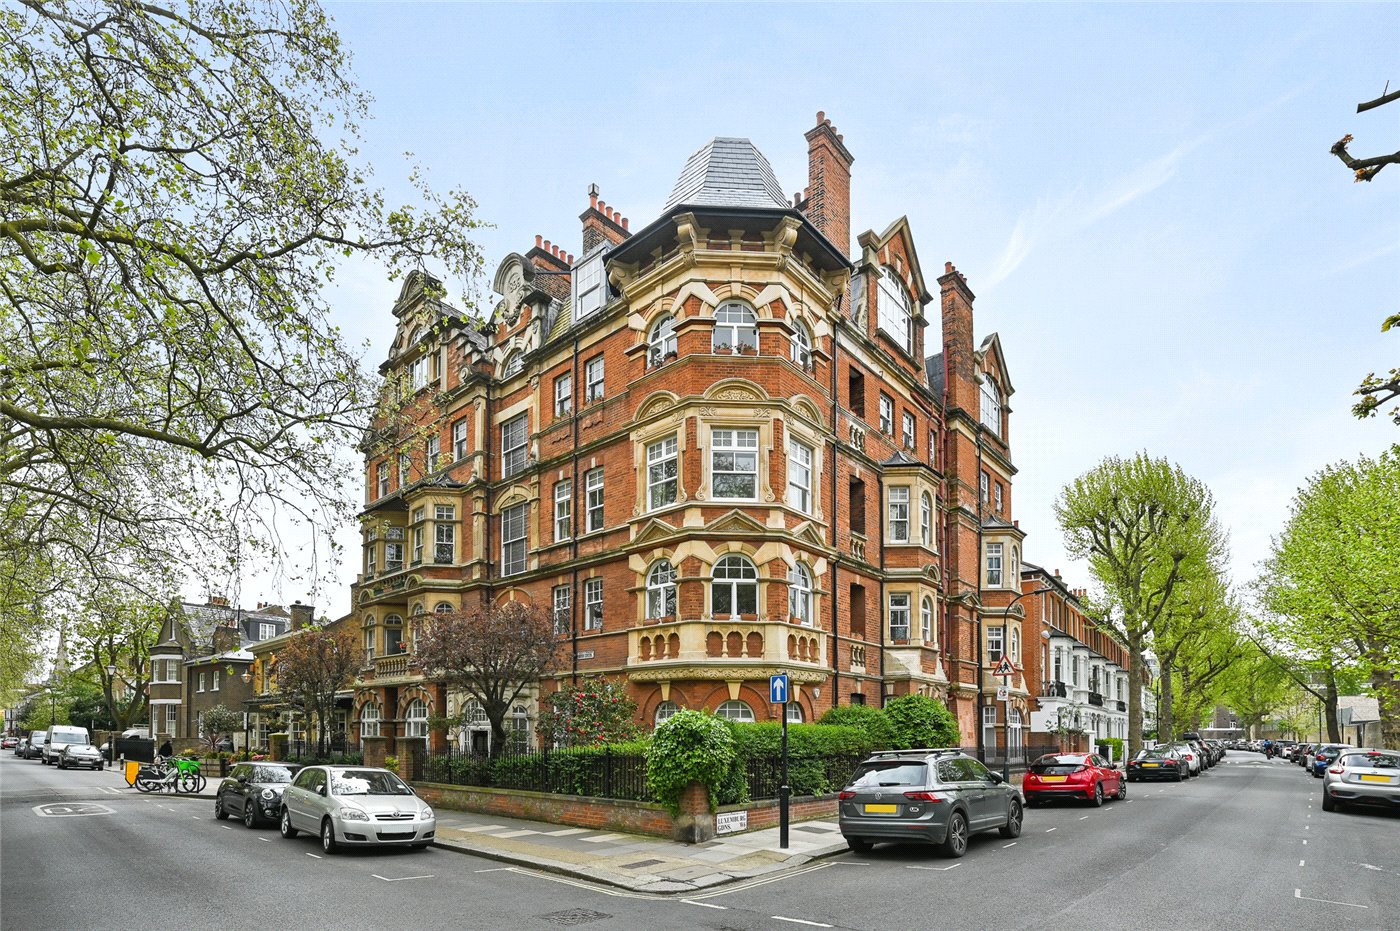 Queens Mansions, Brook Green, London, W6